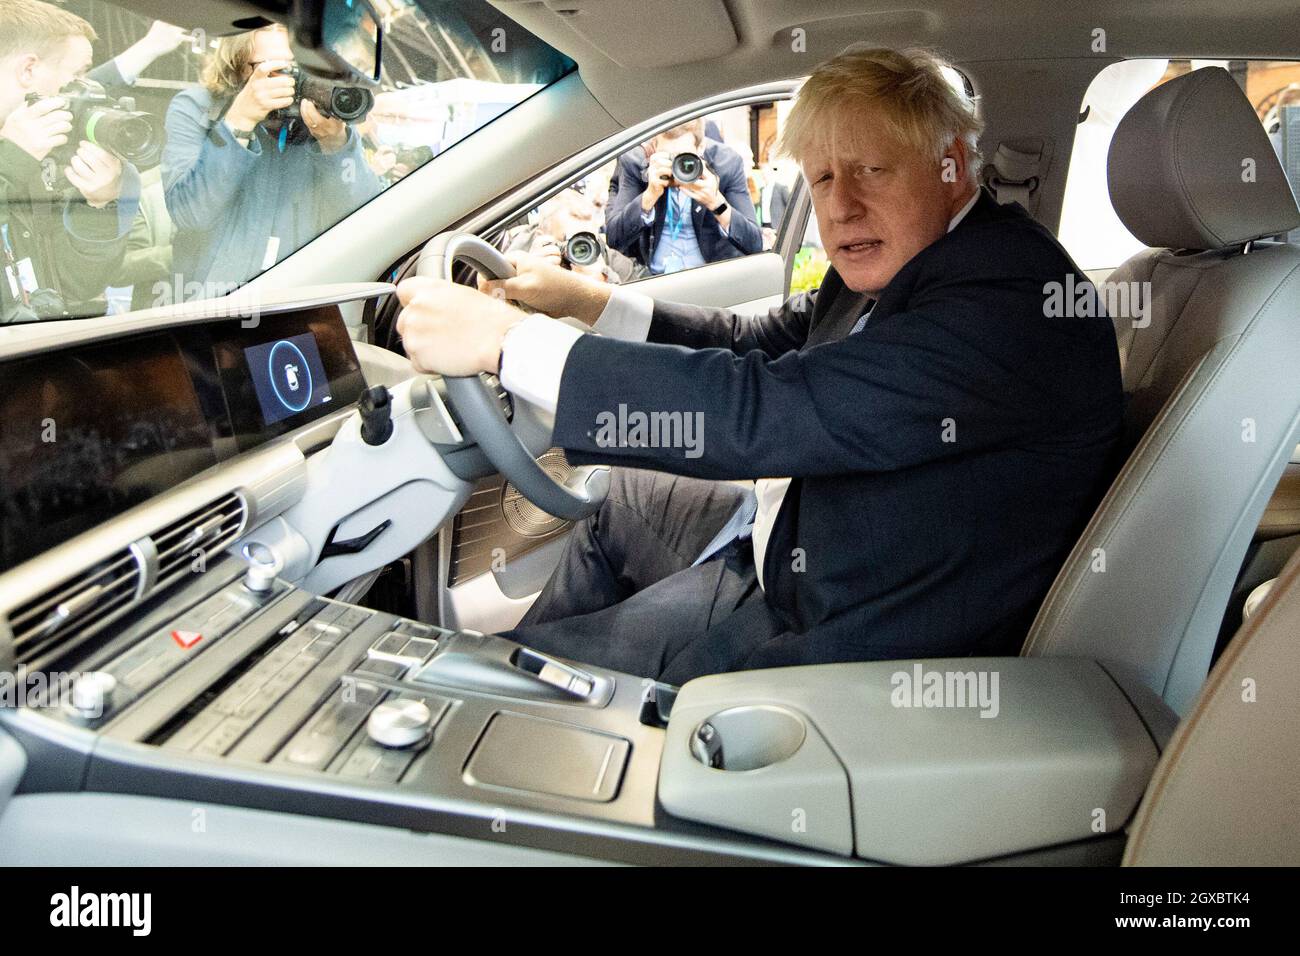 Manchester, England, UK. 5th Oct, 2021. PICTURED: Rt Hon Boris Johnson MP - UK Prime Minister seen doing a walk around of conference and seen cycling a electric e bike and also building a model zero carbon house model and operating a digger excavator. Scenes during the at the Conservative party Conference #CPC21. Credit: Colin Fisher/Alamy Live News Stock Photo